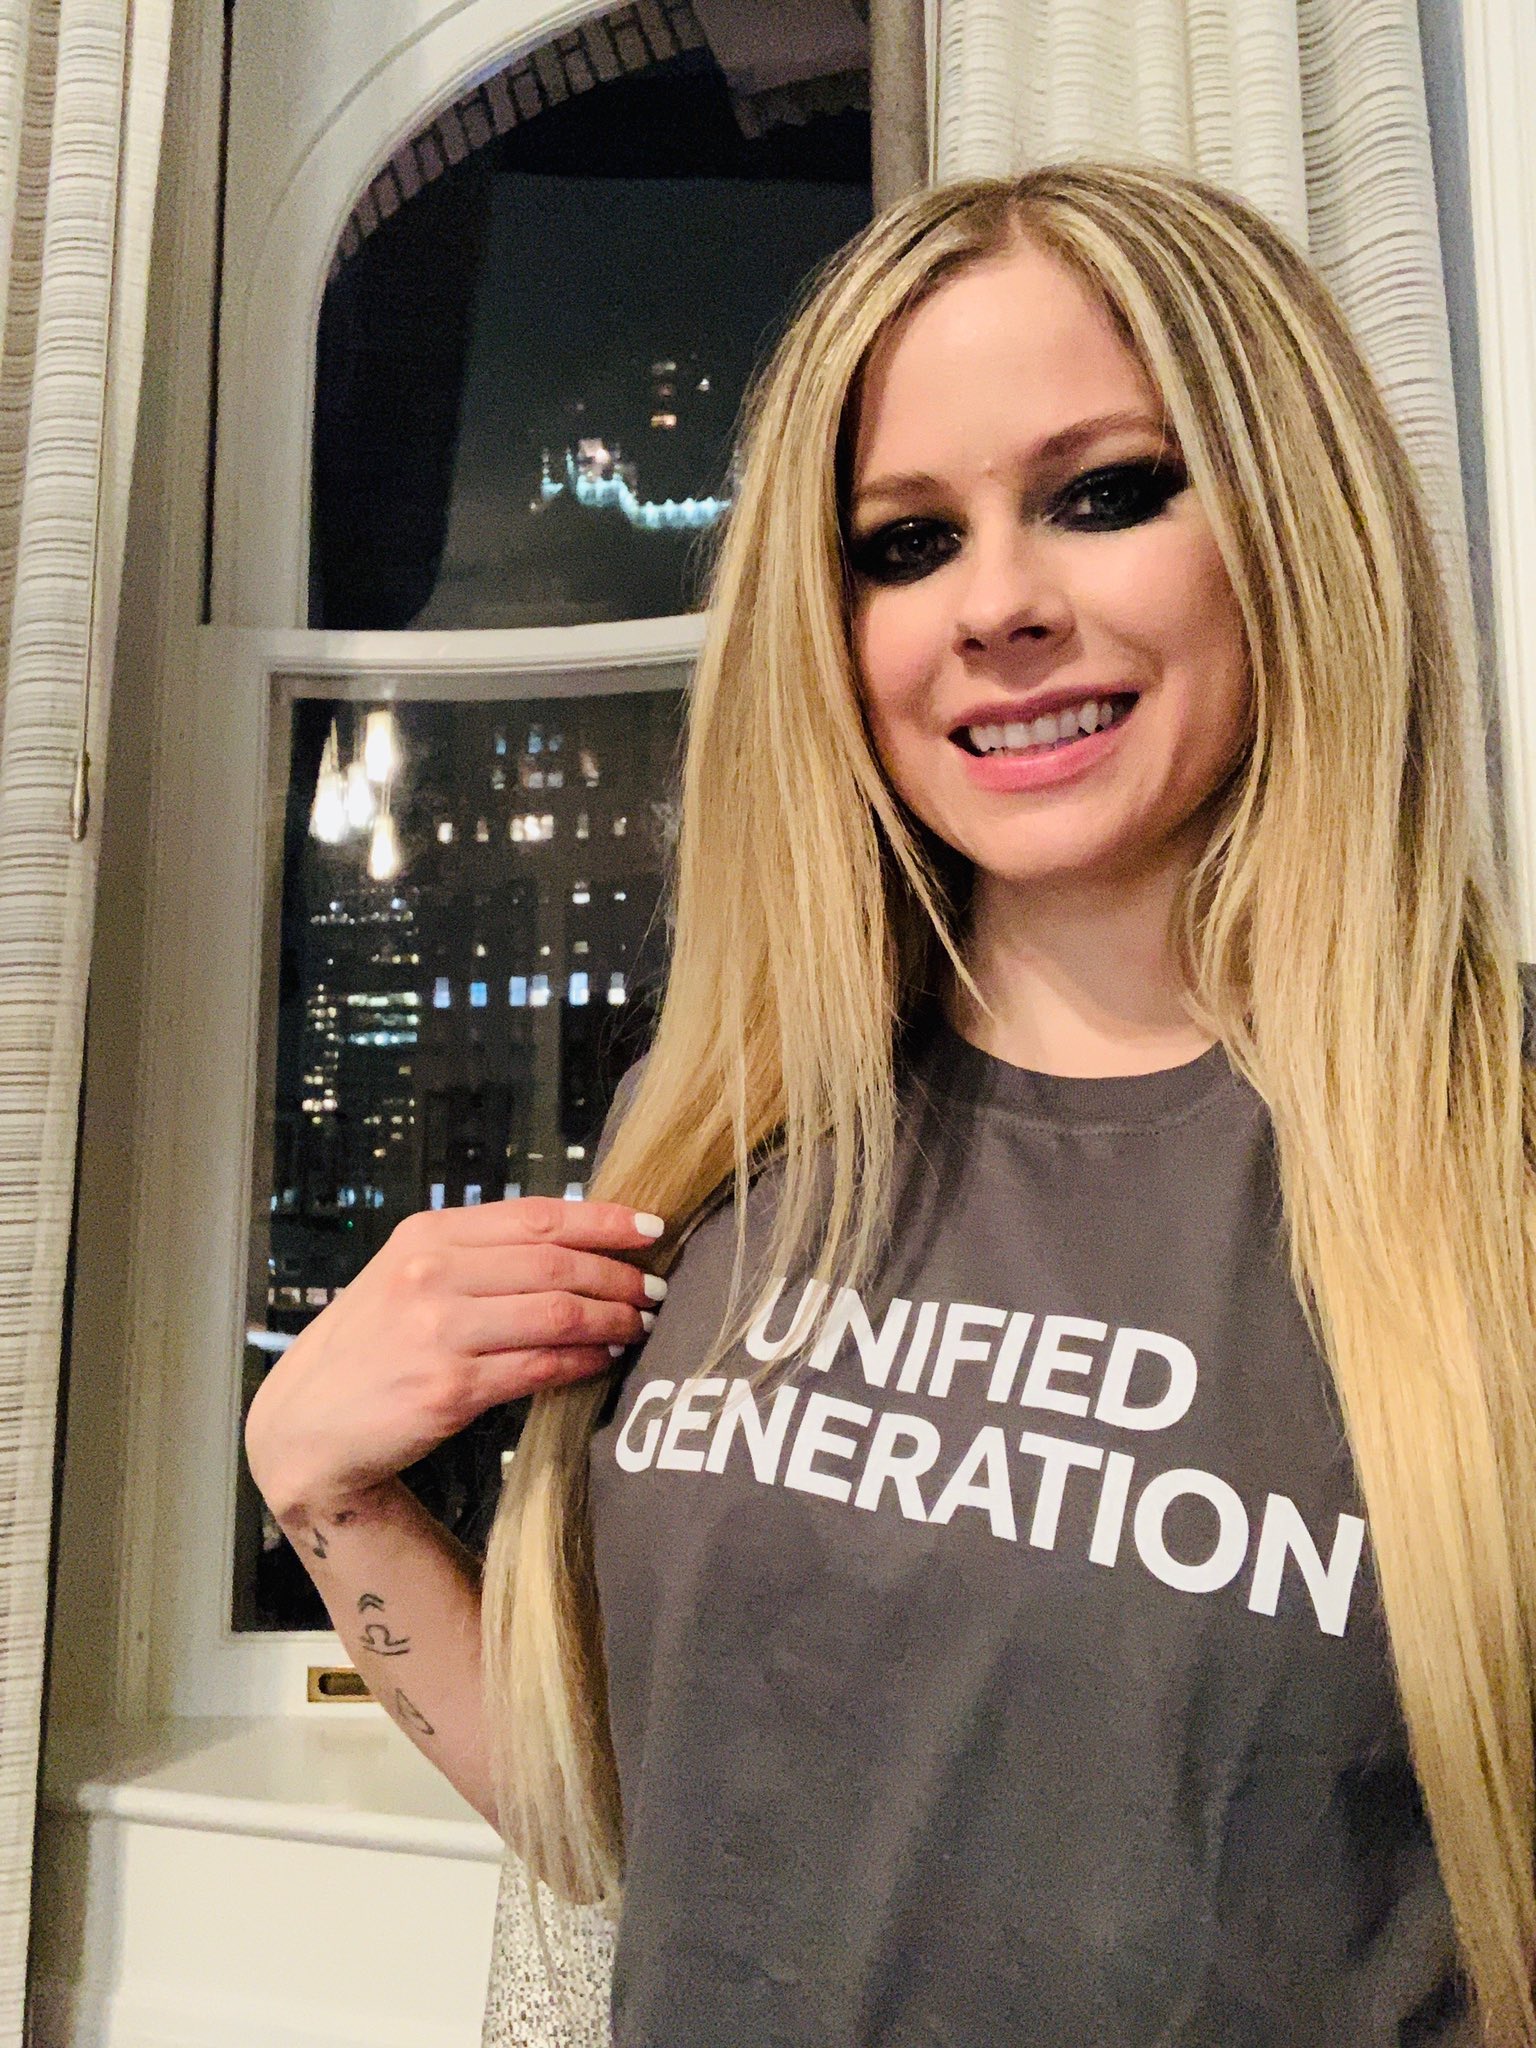 AVRIL LAVIGNE -- Fly High with Special Olympics - ABILITY Magazine